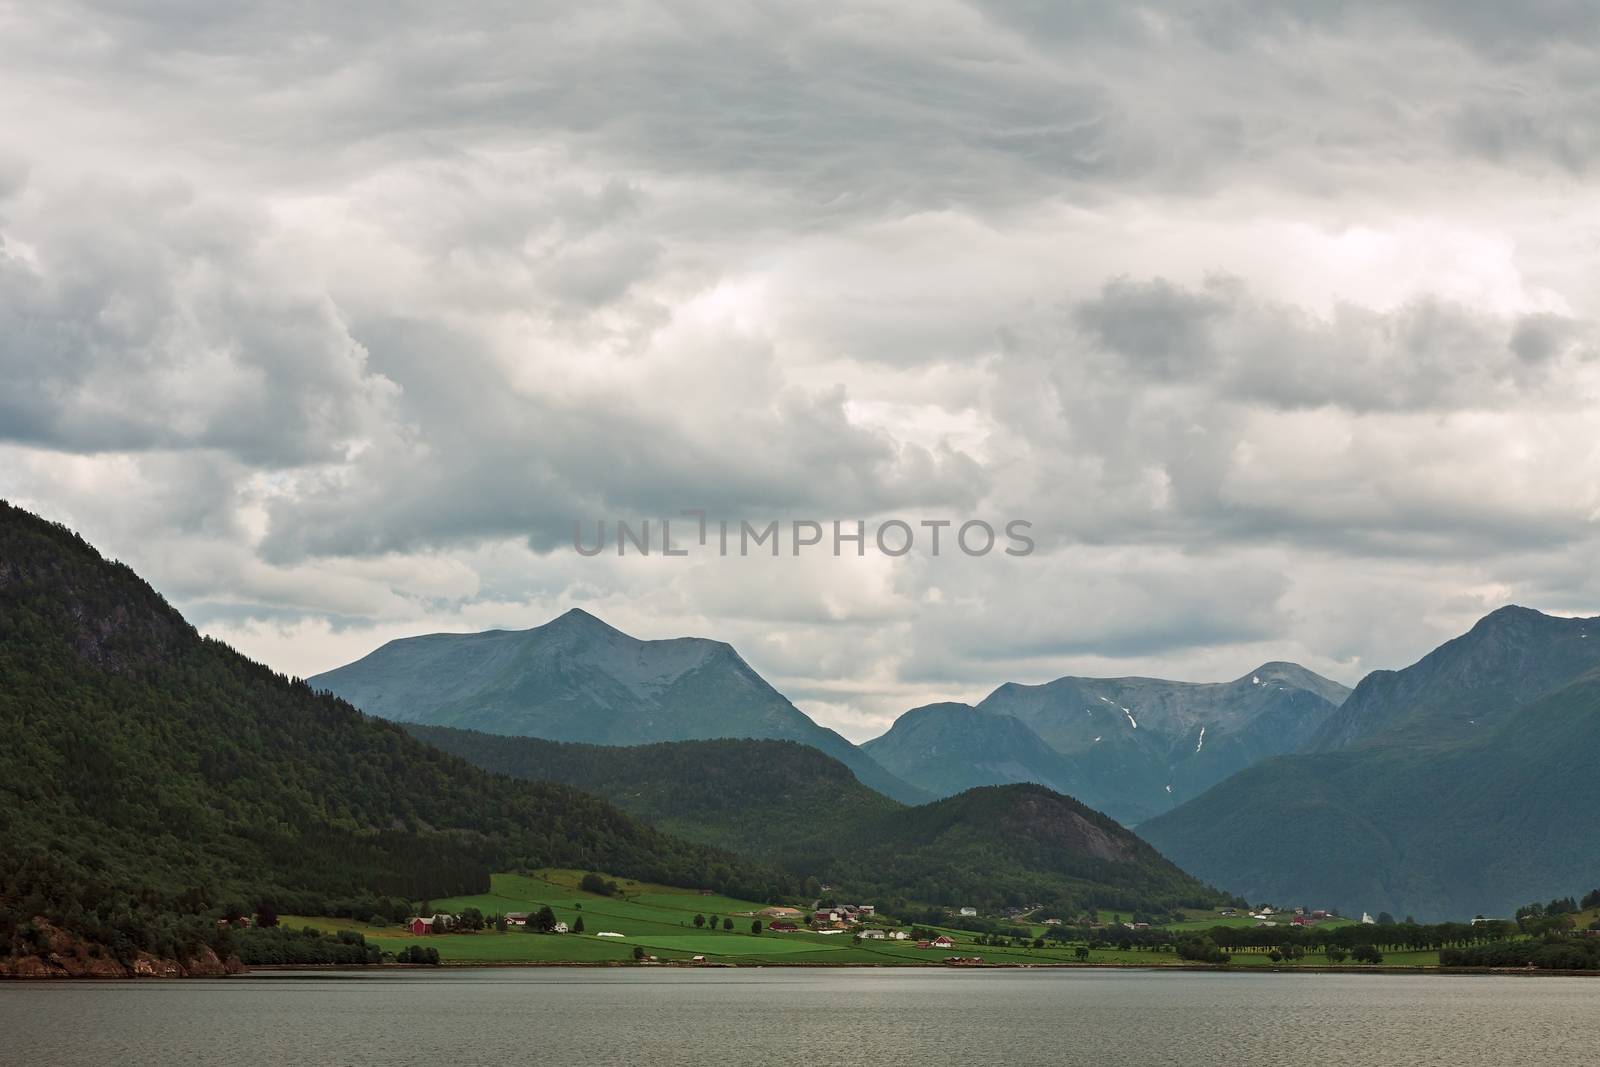 Little village and mountains along the Romsdalsfjorden near Andalsnes under a cloudy sky, Norway